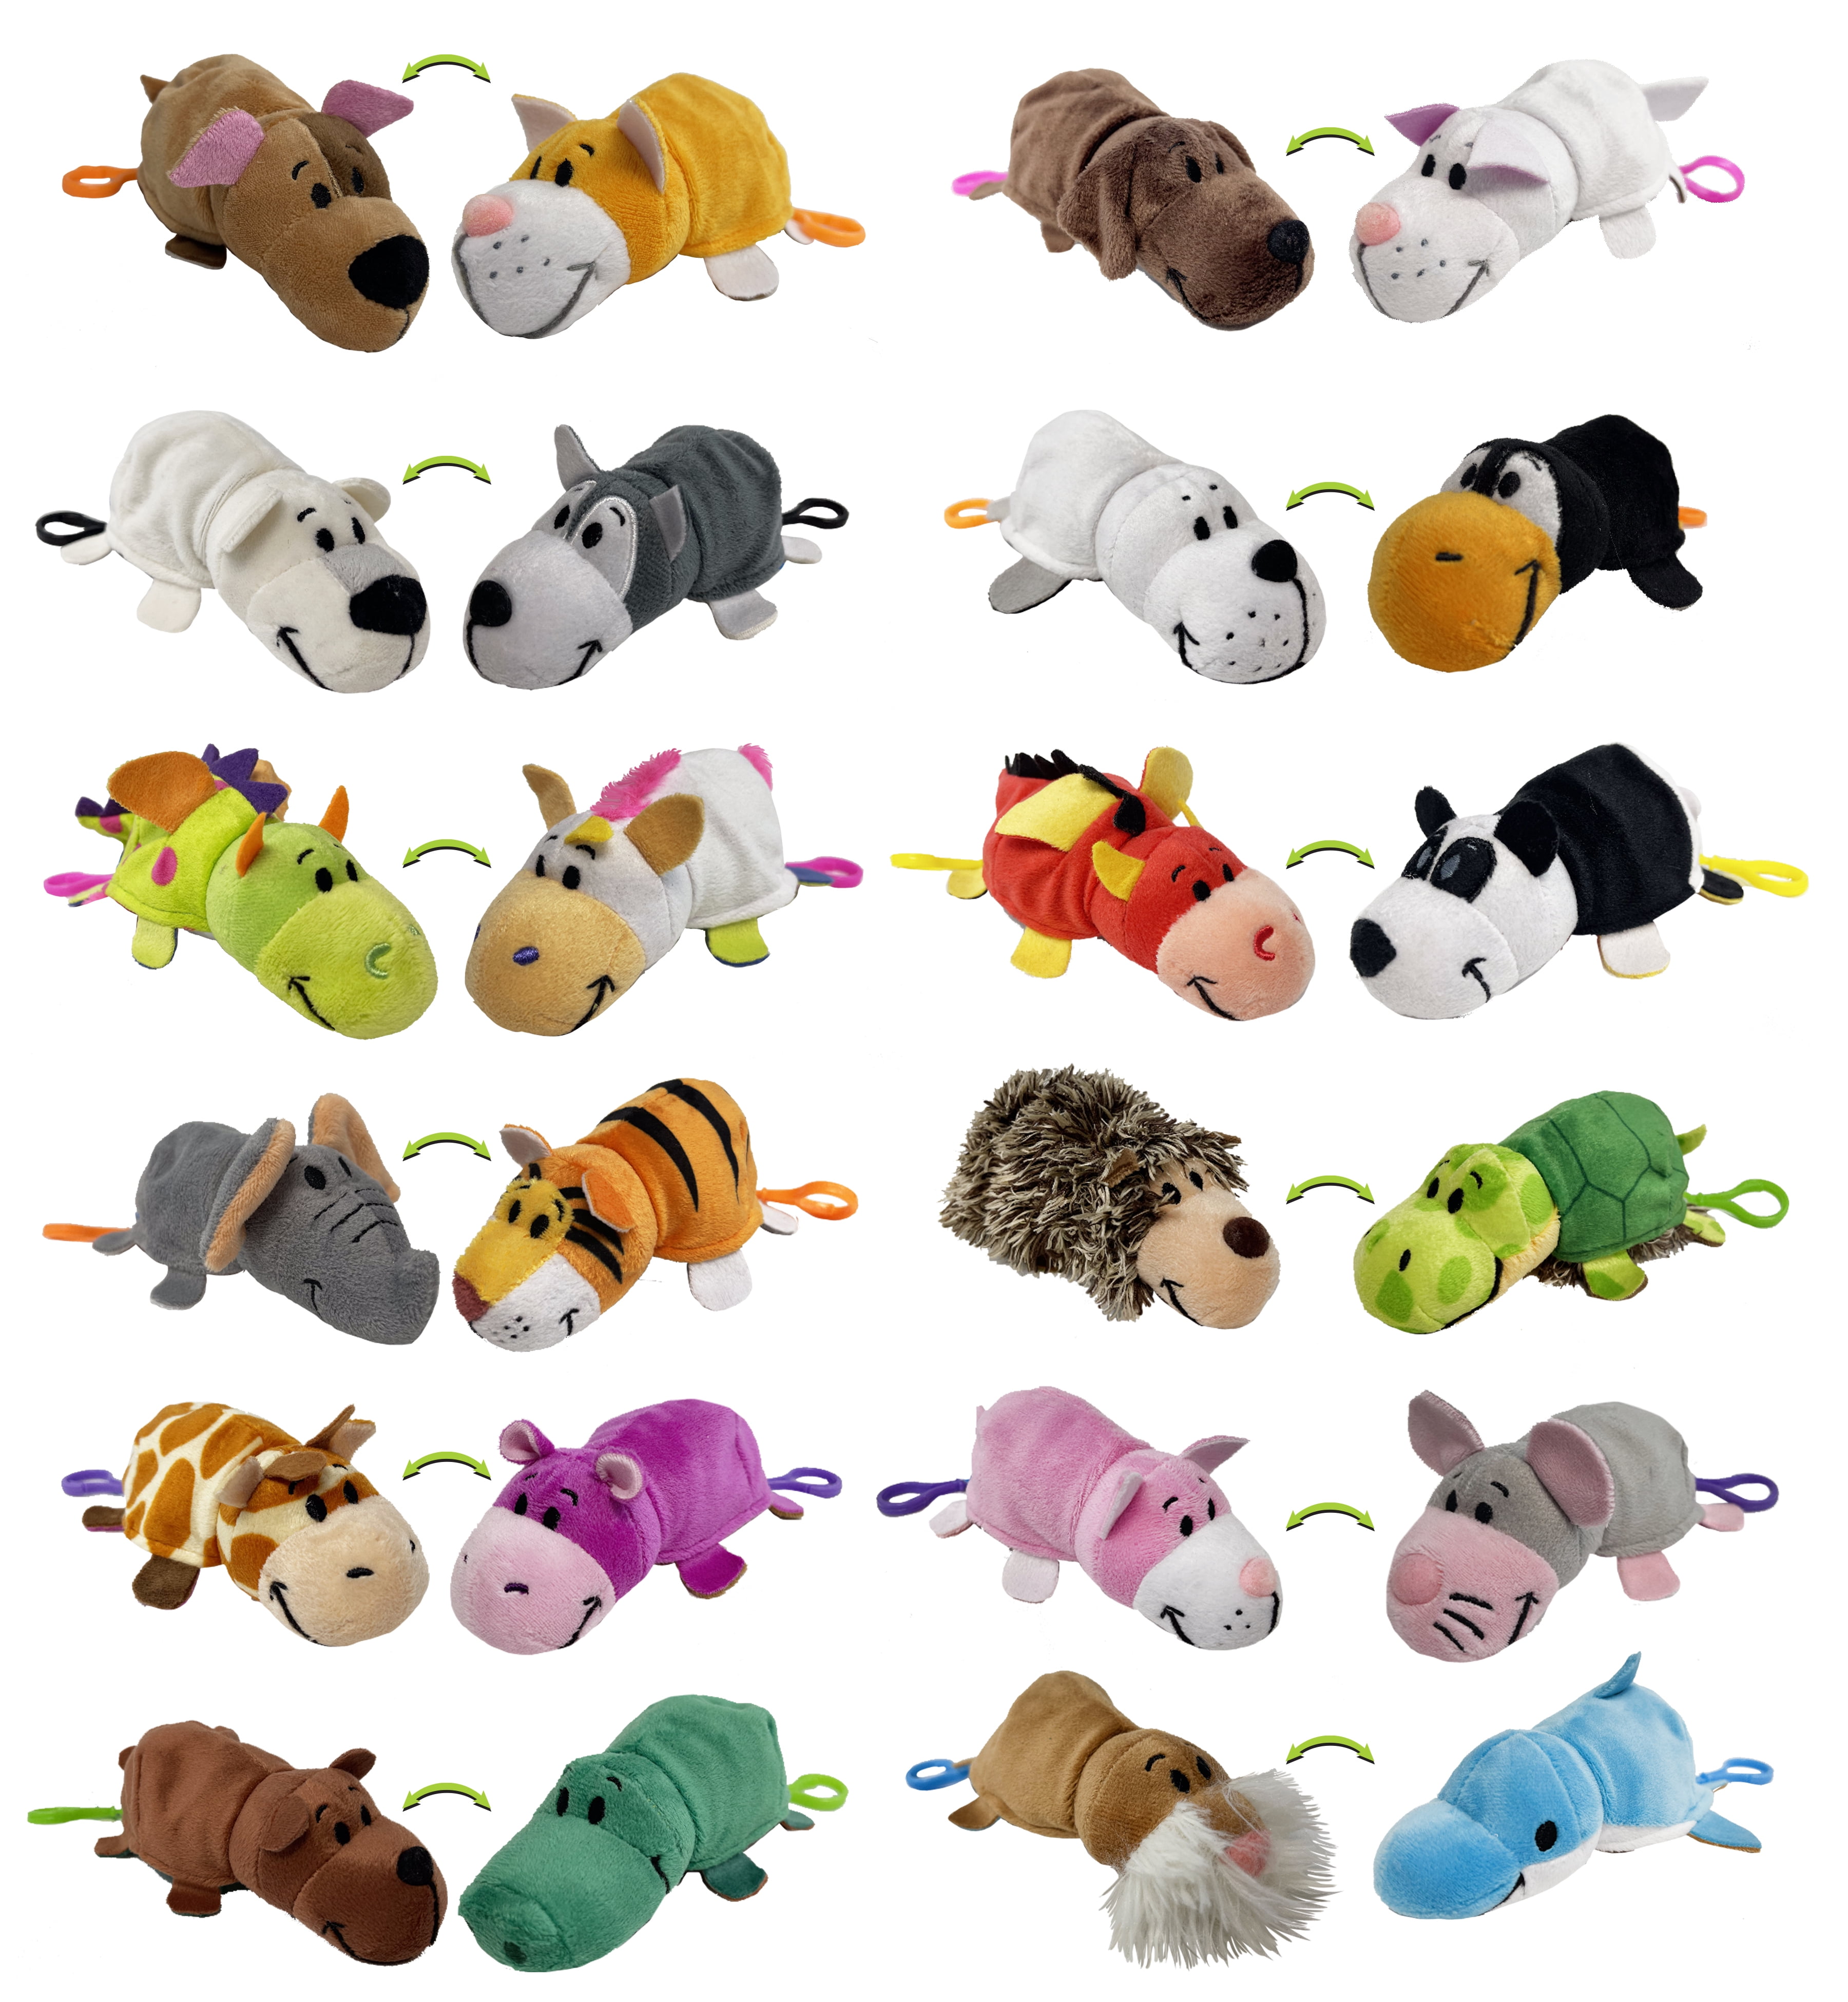 The Original FlipaZoo 5 inch Plush Toys with Clip, Sold Individually